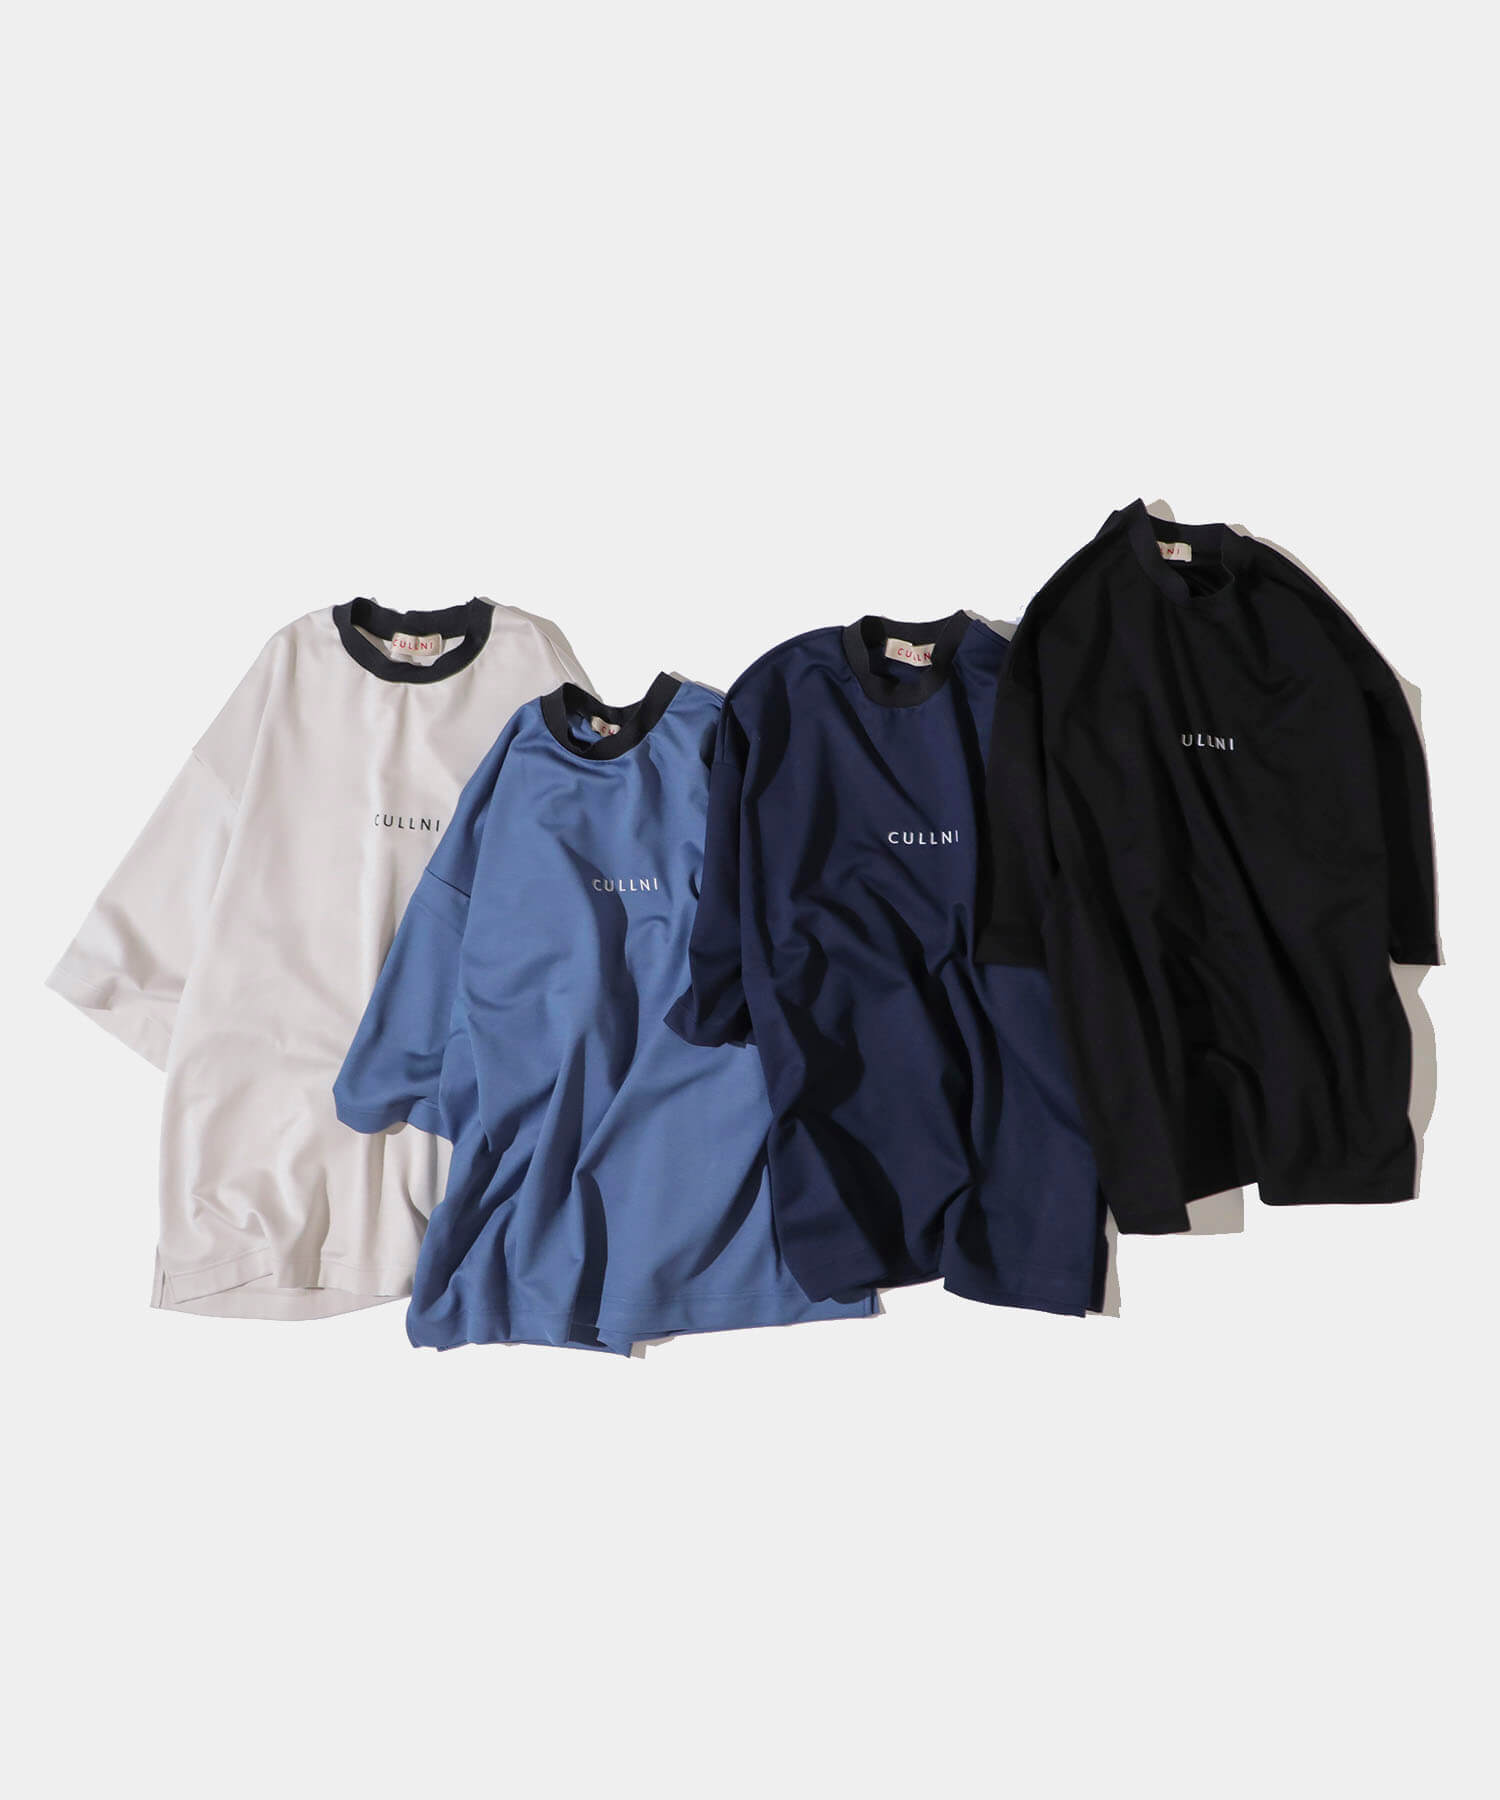 STUDIOUS EXCLUSIVE COLLECTION 2 / cullni｜ STUDIOUS ONLINE公式通販 